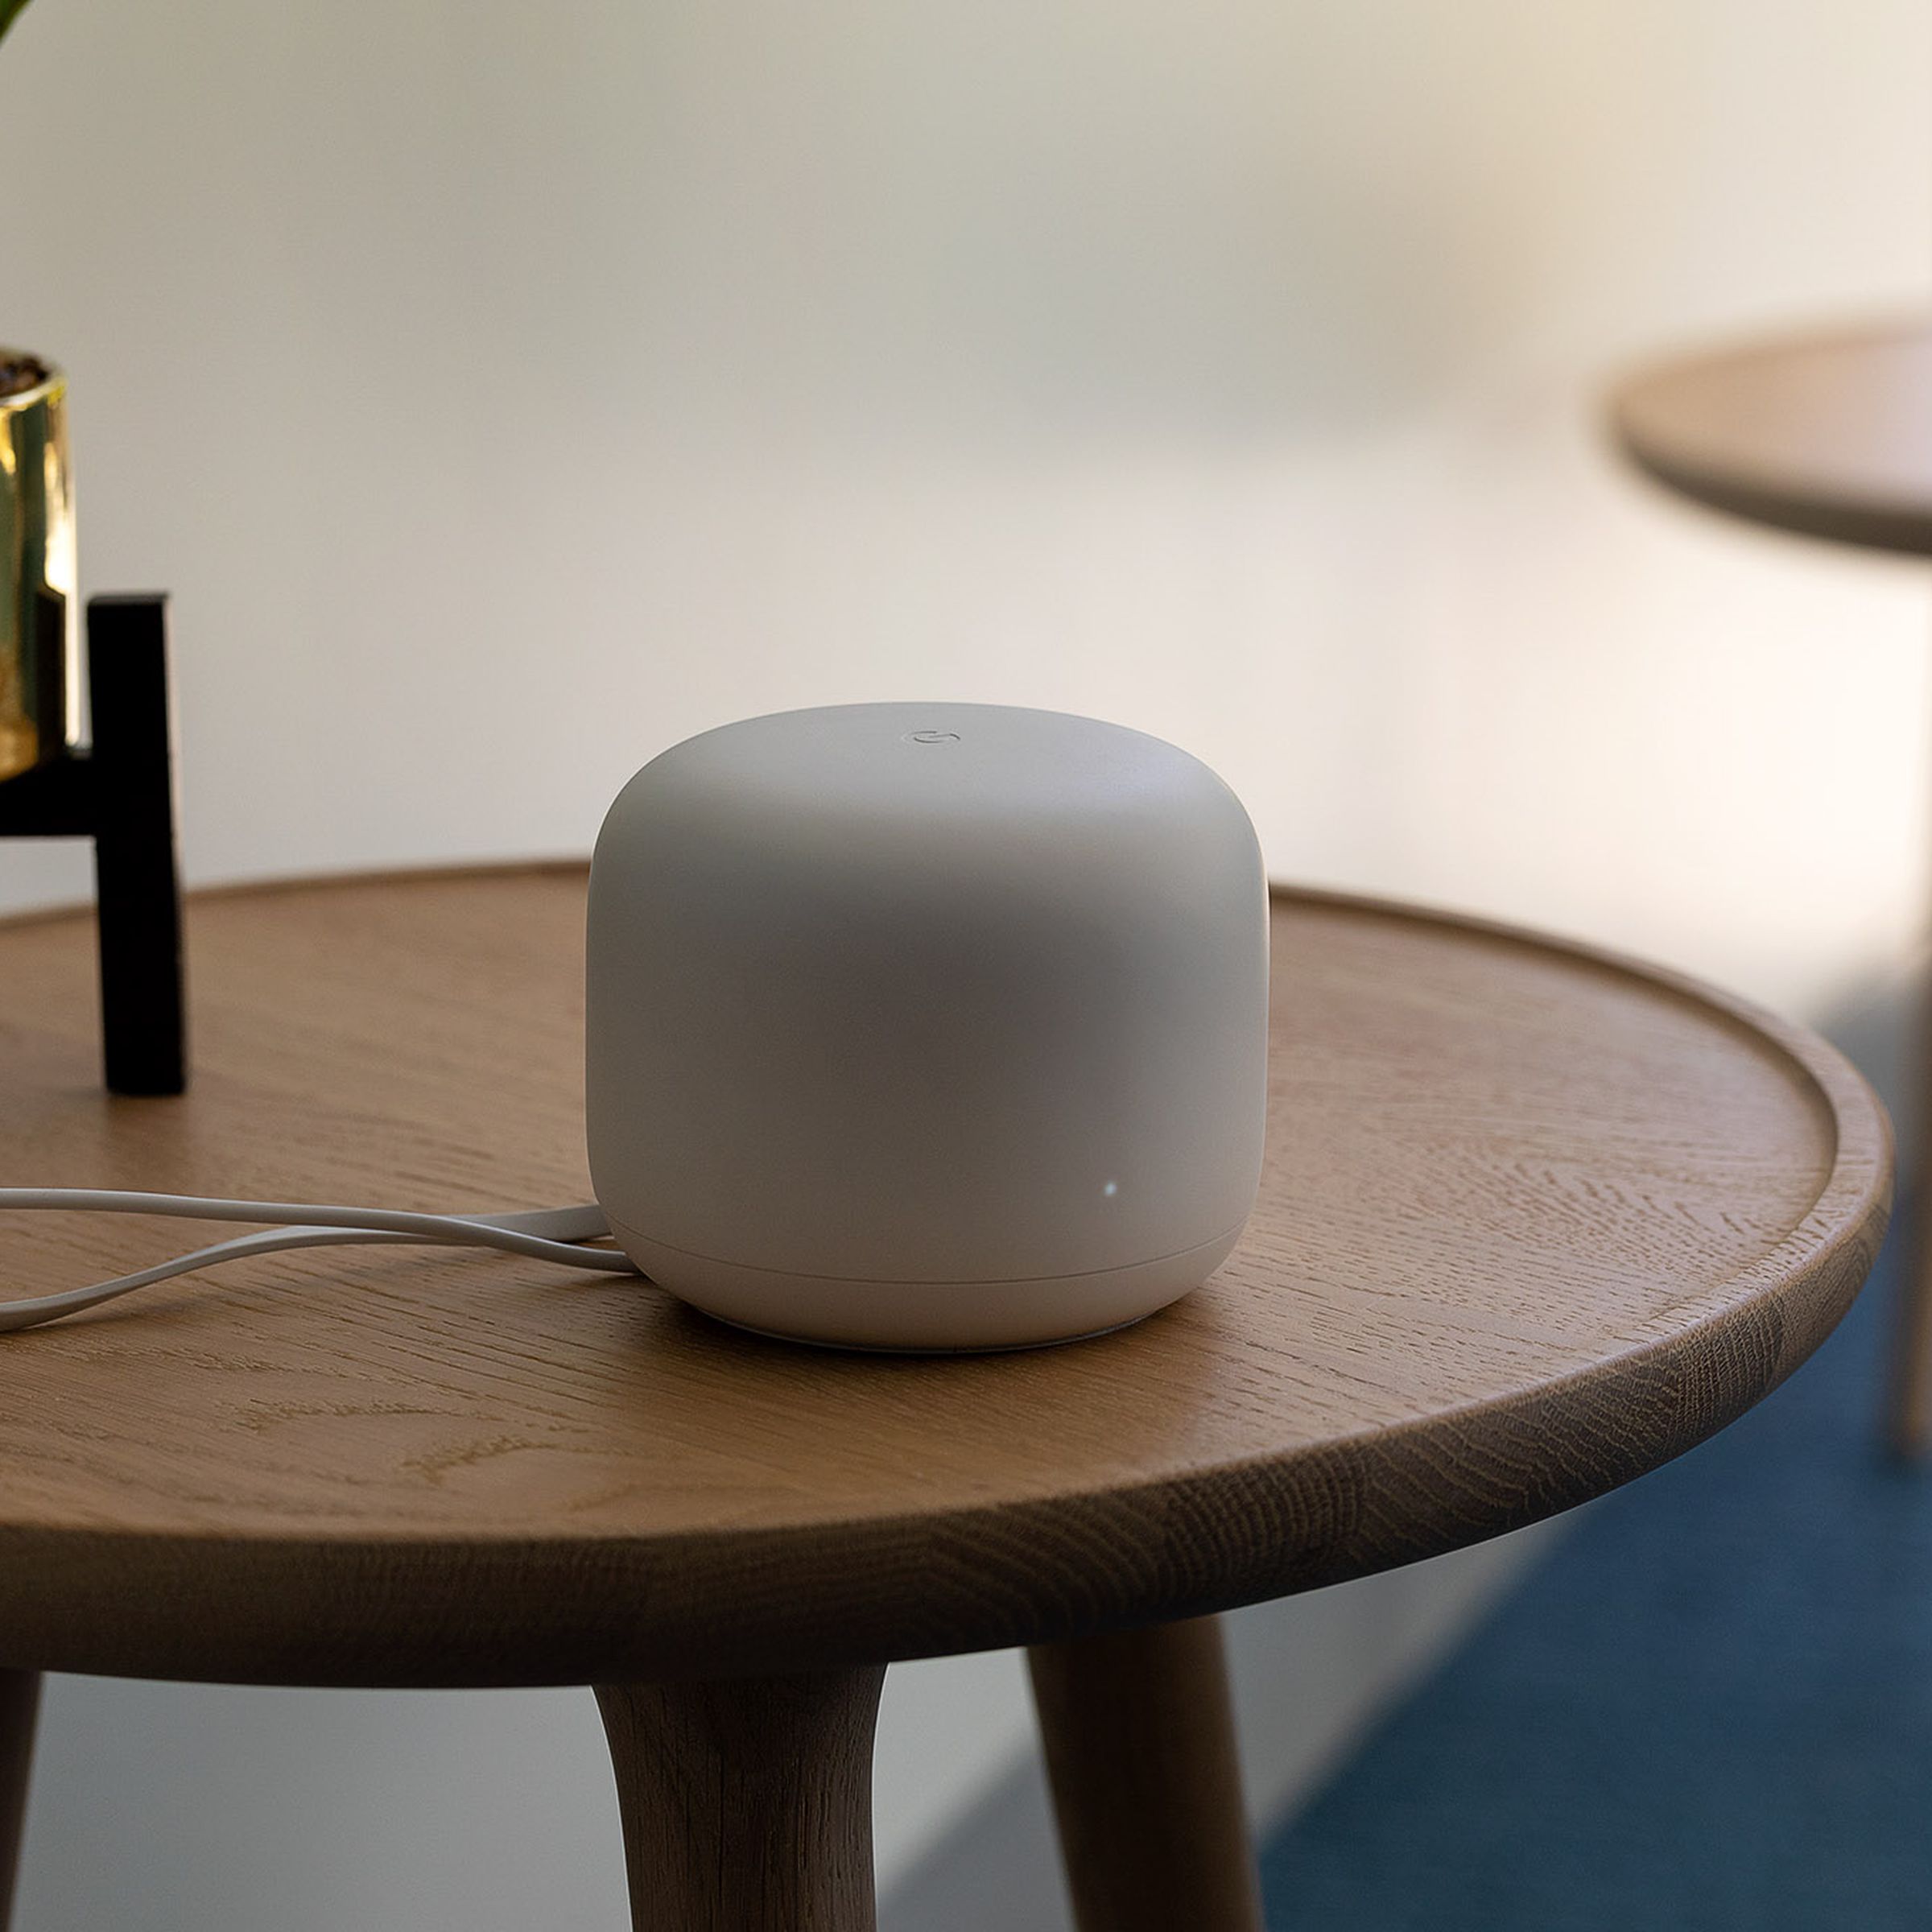 Google Home device on a side table.